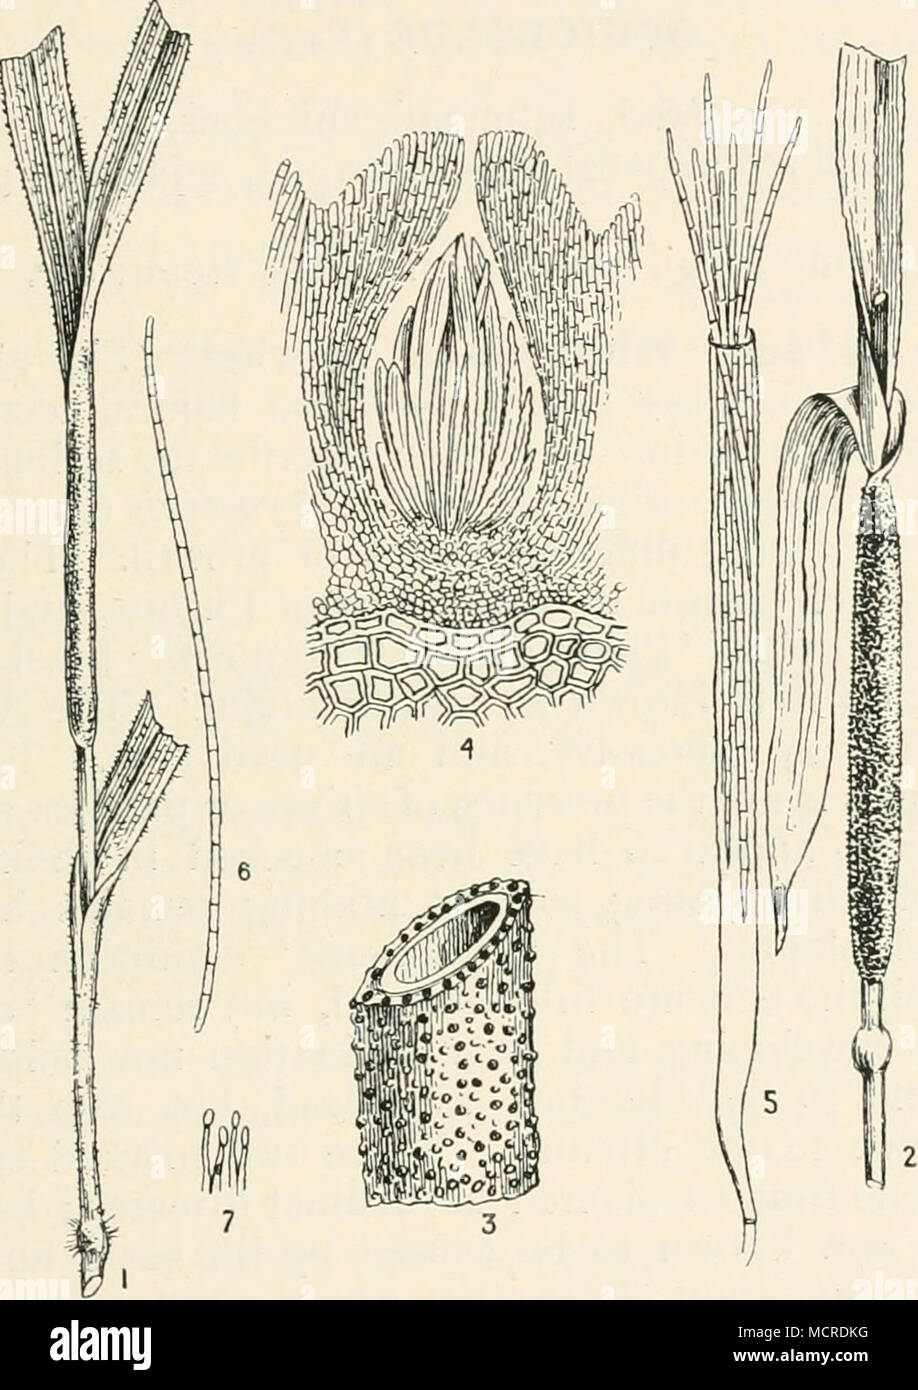 . Fig. 65.—Epichloe typhina. i, fungus or leaf-sheath oiHolcus mollis; 2, fungus on Holciis lanatus ; 3, portion of fungus showing warts on surface, corresponding to mouths of perithecia ; 4, section of perithecium ; 5, ascus with spores escaping ; 6, ascospore ; 7, conidiophores with conidia. Figs, i and 2 reduced ; remainder mag. plant of which was infected. It is often abundant on wild grasses growing on the borders of fields, etc. The only preventive method that can be suggested is that of cutting the grass before the fungus becomes orange in P Stock Photo